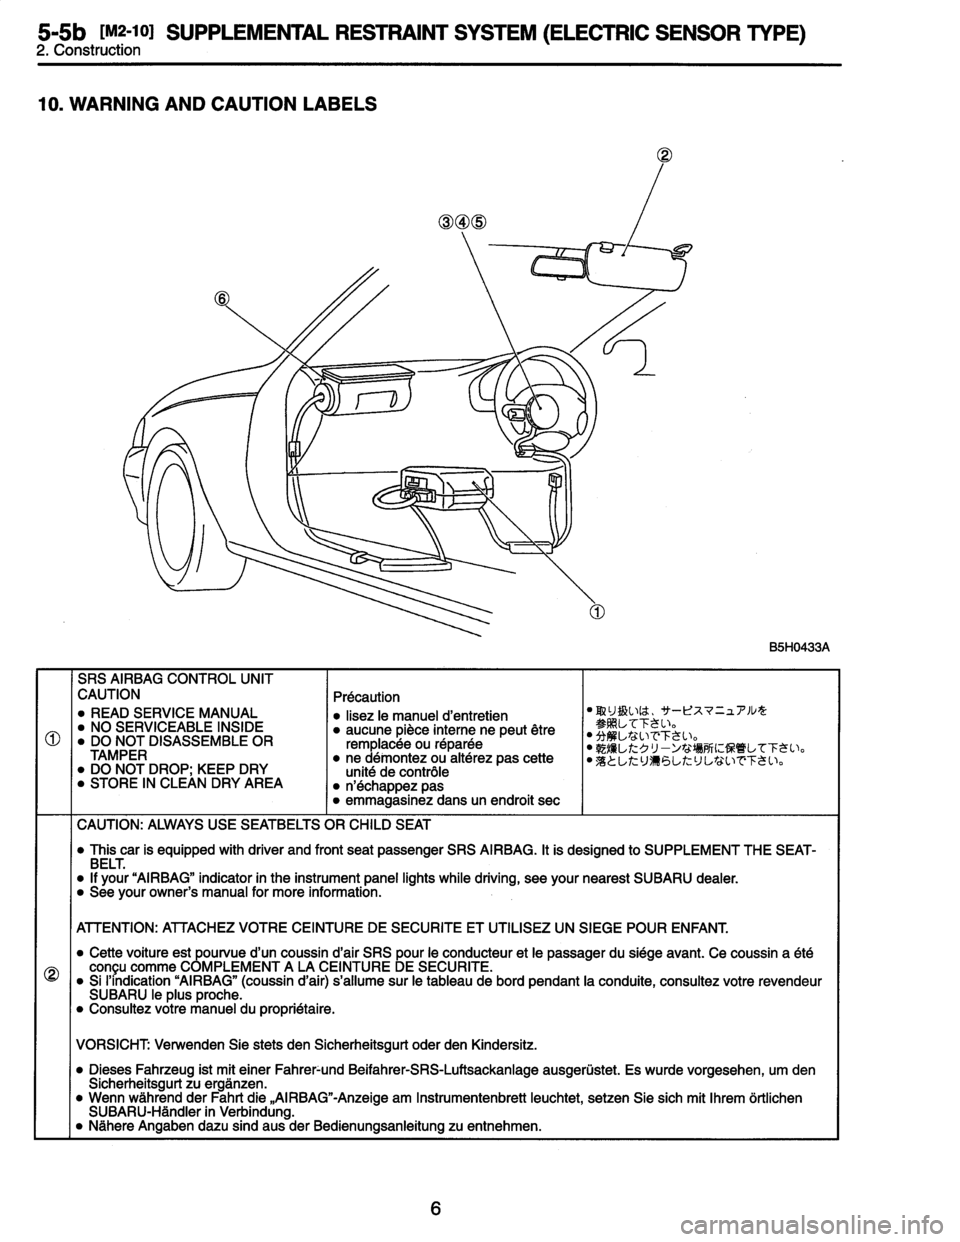 SUBARU LEGACY 1996  Service Repair Manual 
5-5b
IMZ-10I
SUPPLEMENTAL
RESTRAINT
SYSTEM
(ELECTRIC
SENSOR
TYPE)
2
.
Const
r
uc
ti
on

10
.
WARNING
AND
CAUTION
LABELS

B5H0433A

O

SRS
AIRBAG
CONTROL
UNIT
CAUTION

"
READ
SERVICE
MANUAL
"
